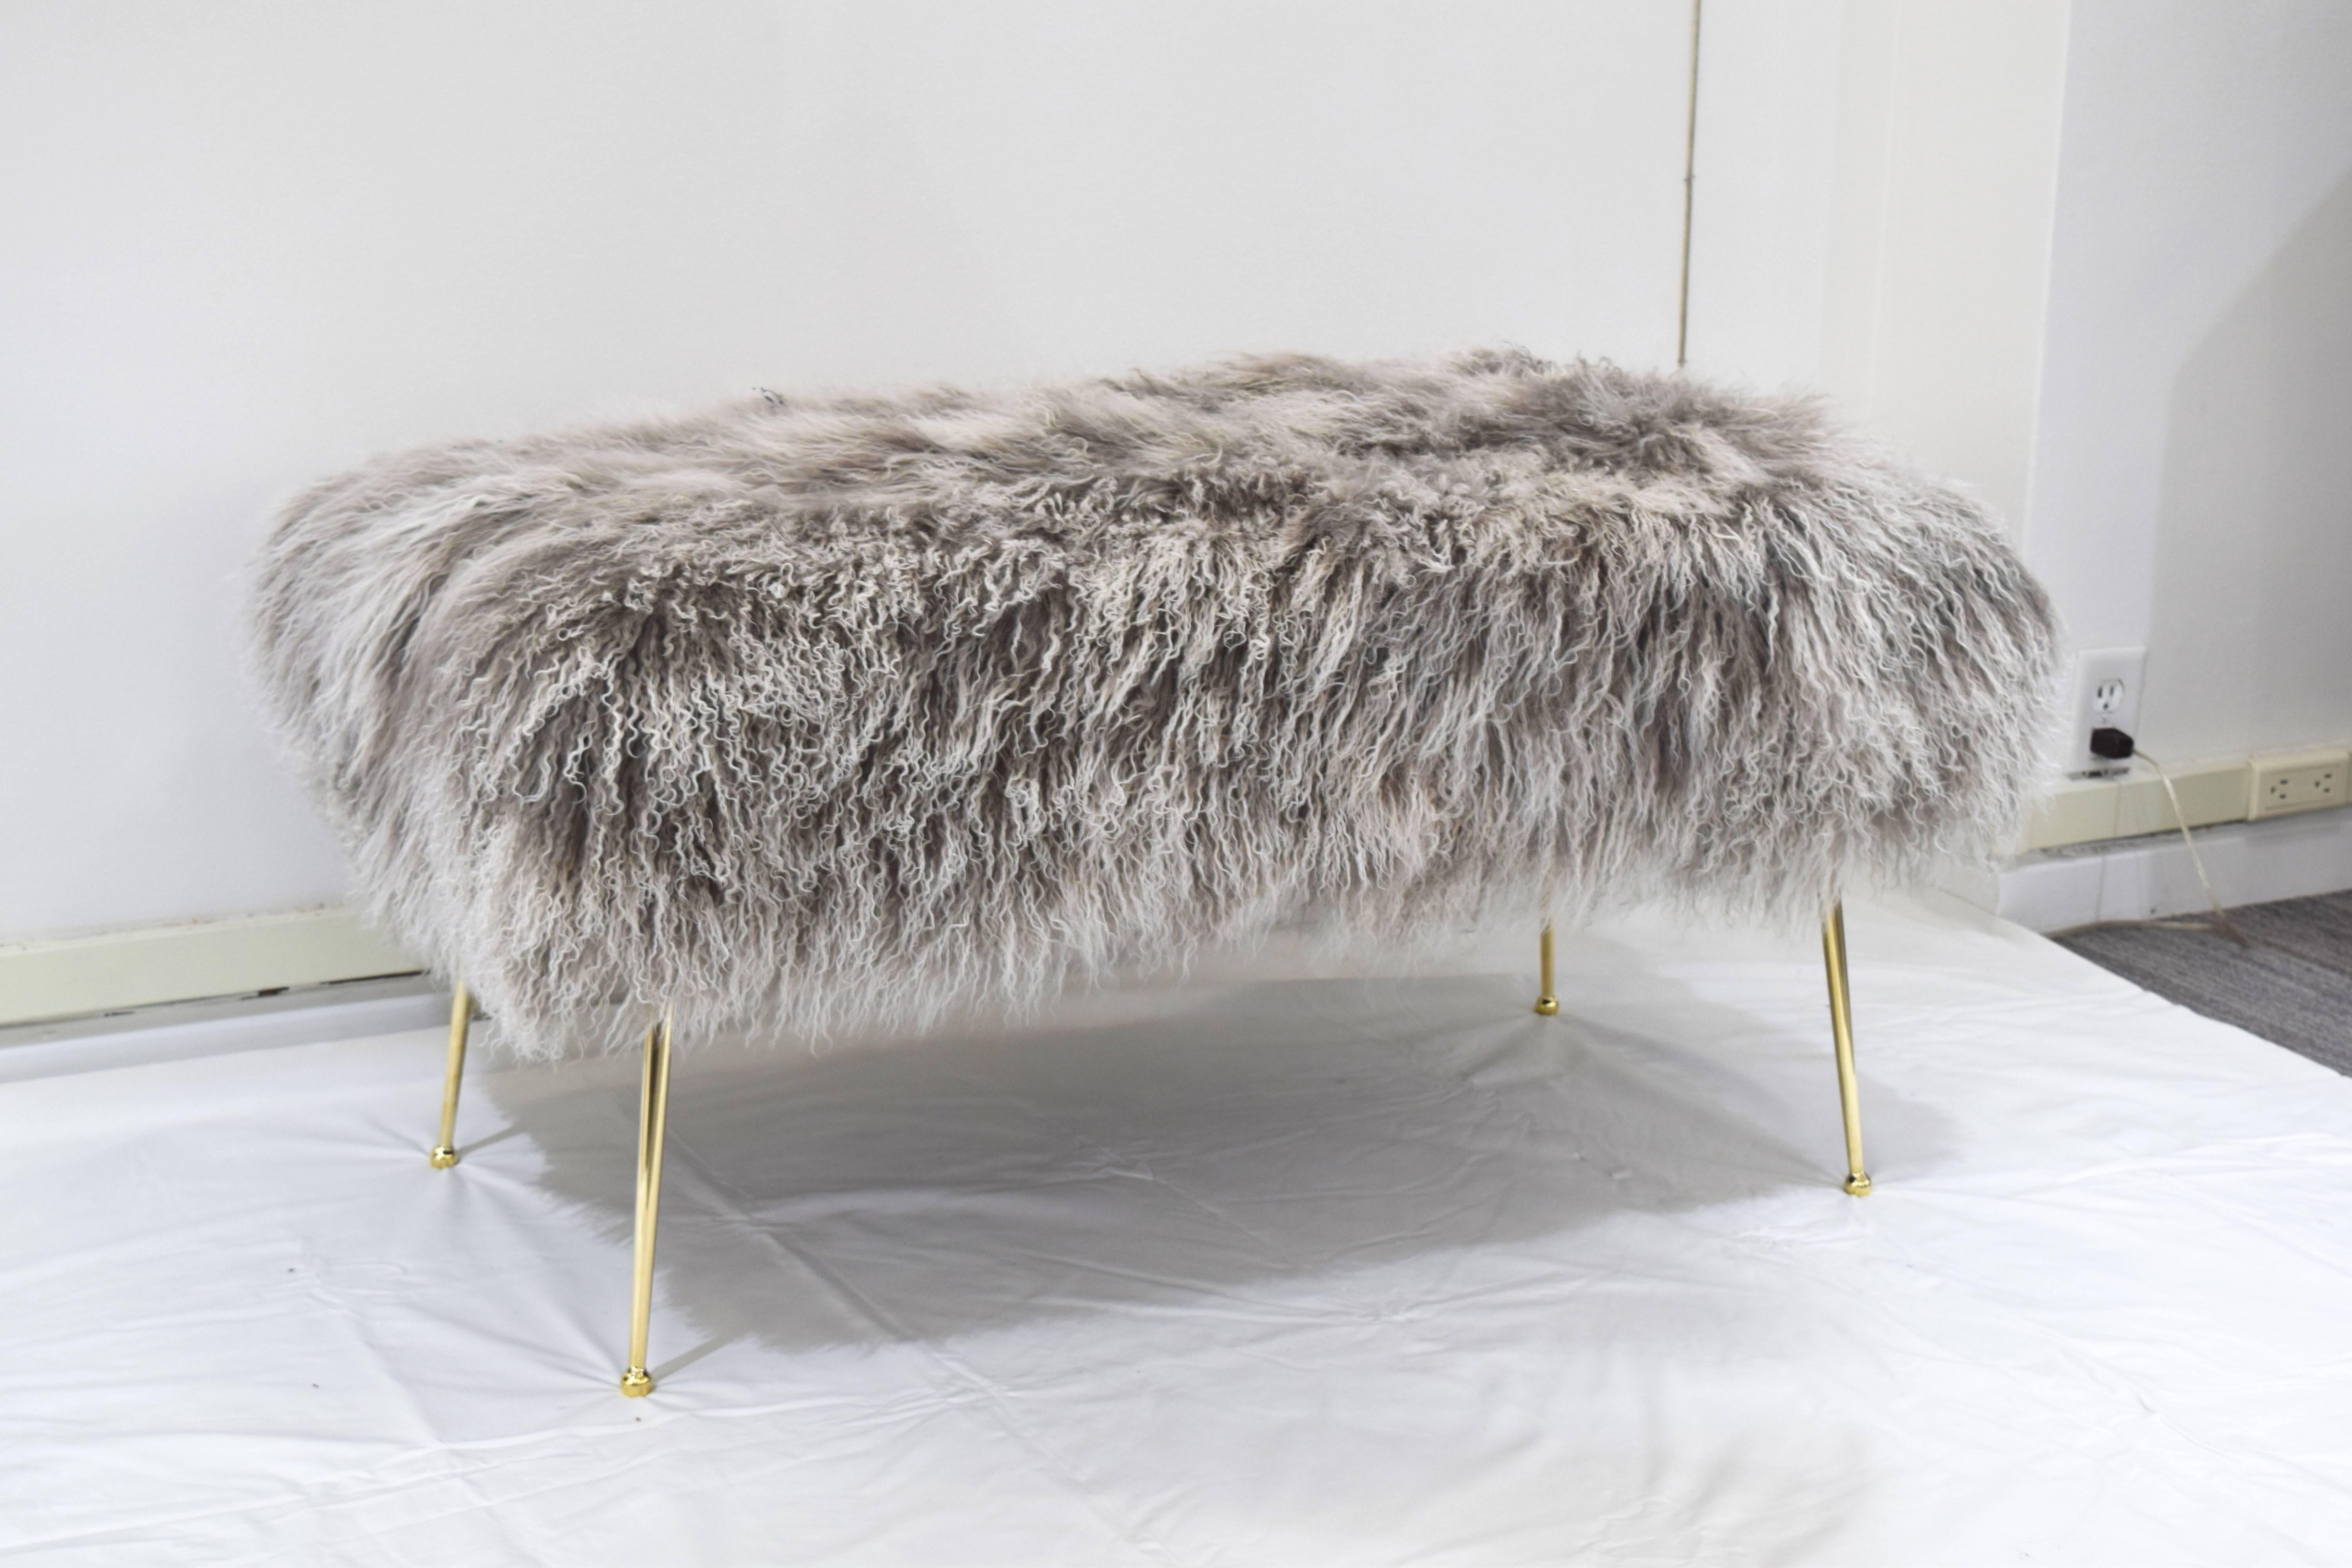 Custom Vivier bench designed by Irwin Feld Design for CF Modern. Featuring solid brass polished tapered legs with a custom upholstery top (shown here in a grey Mongolian fur). Available COM and in other sizes. Legs available nickel plated as well